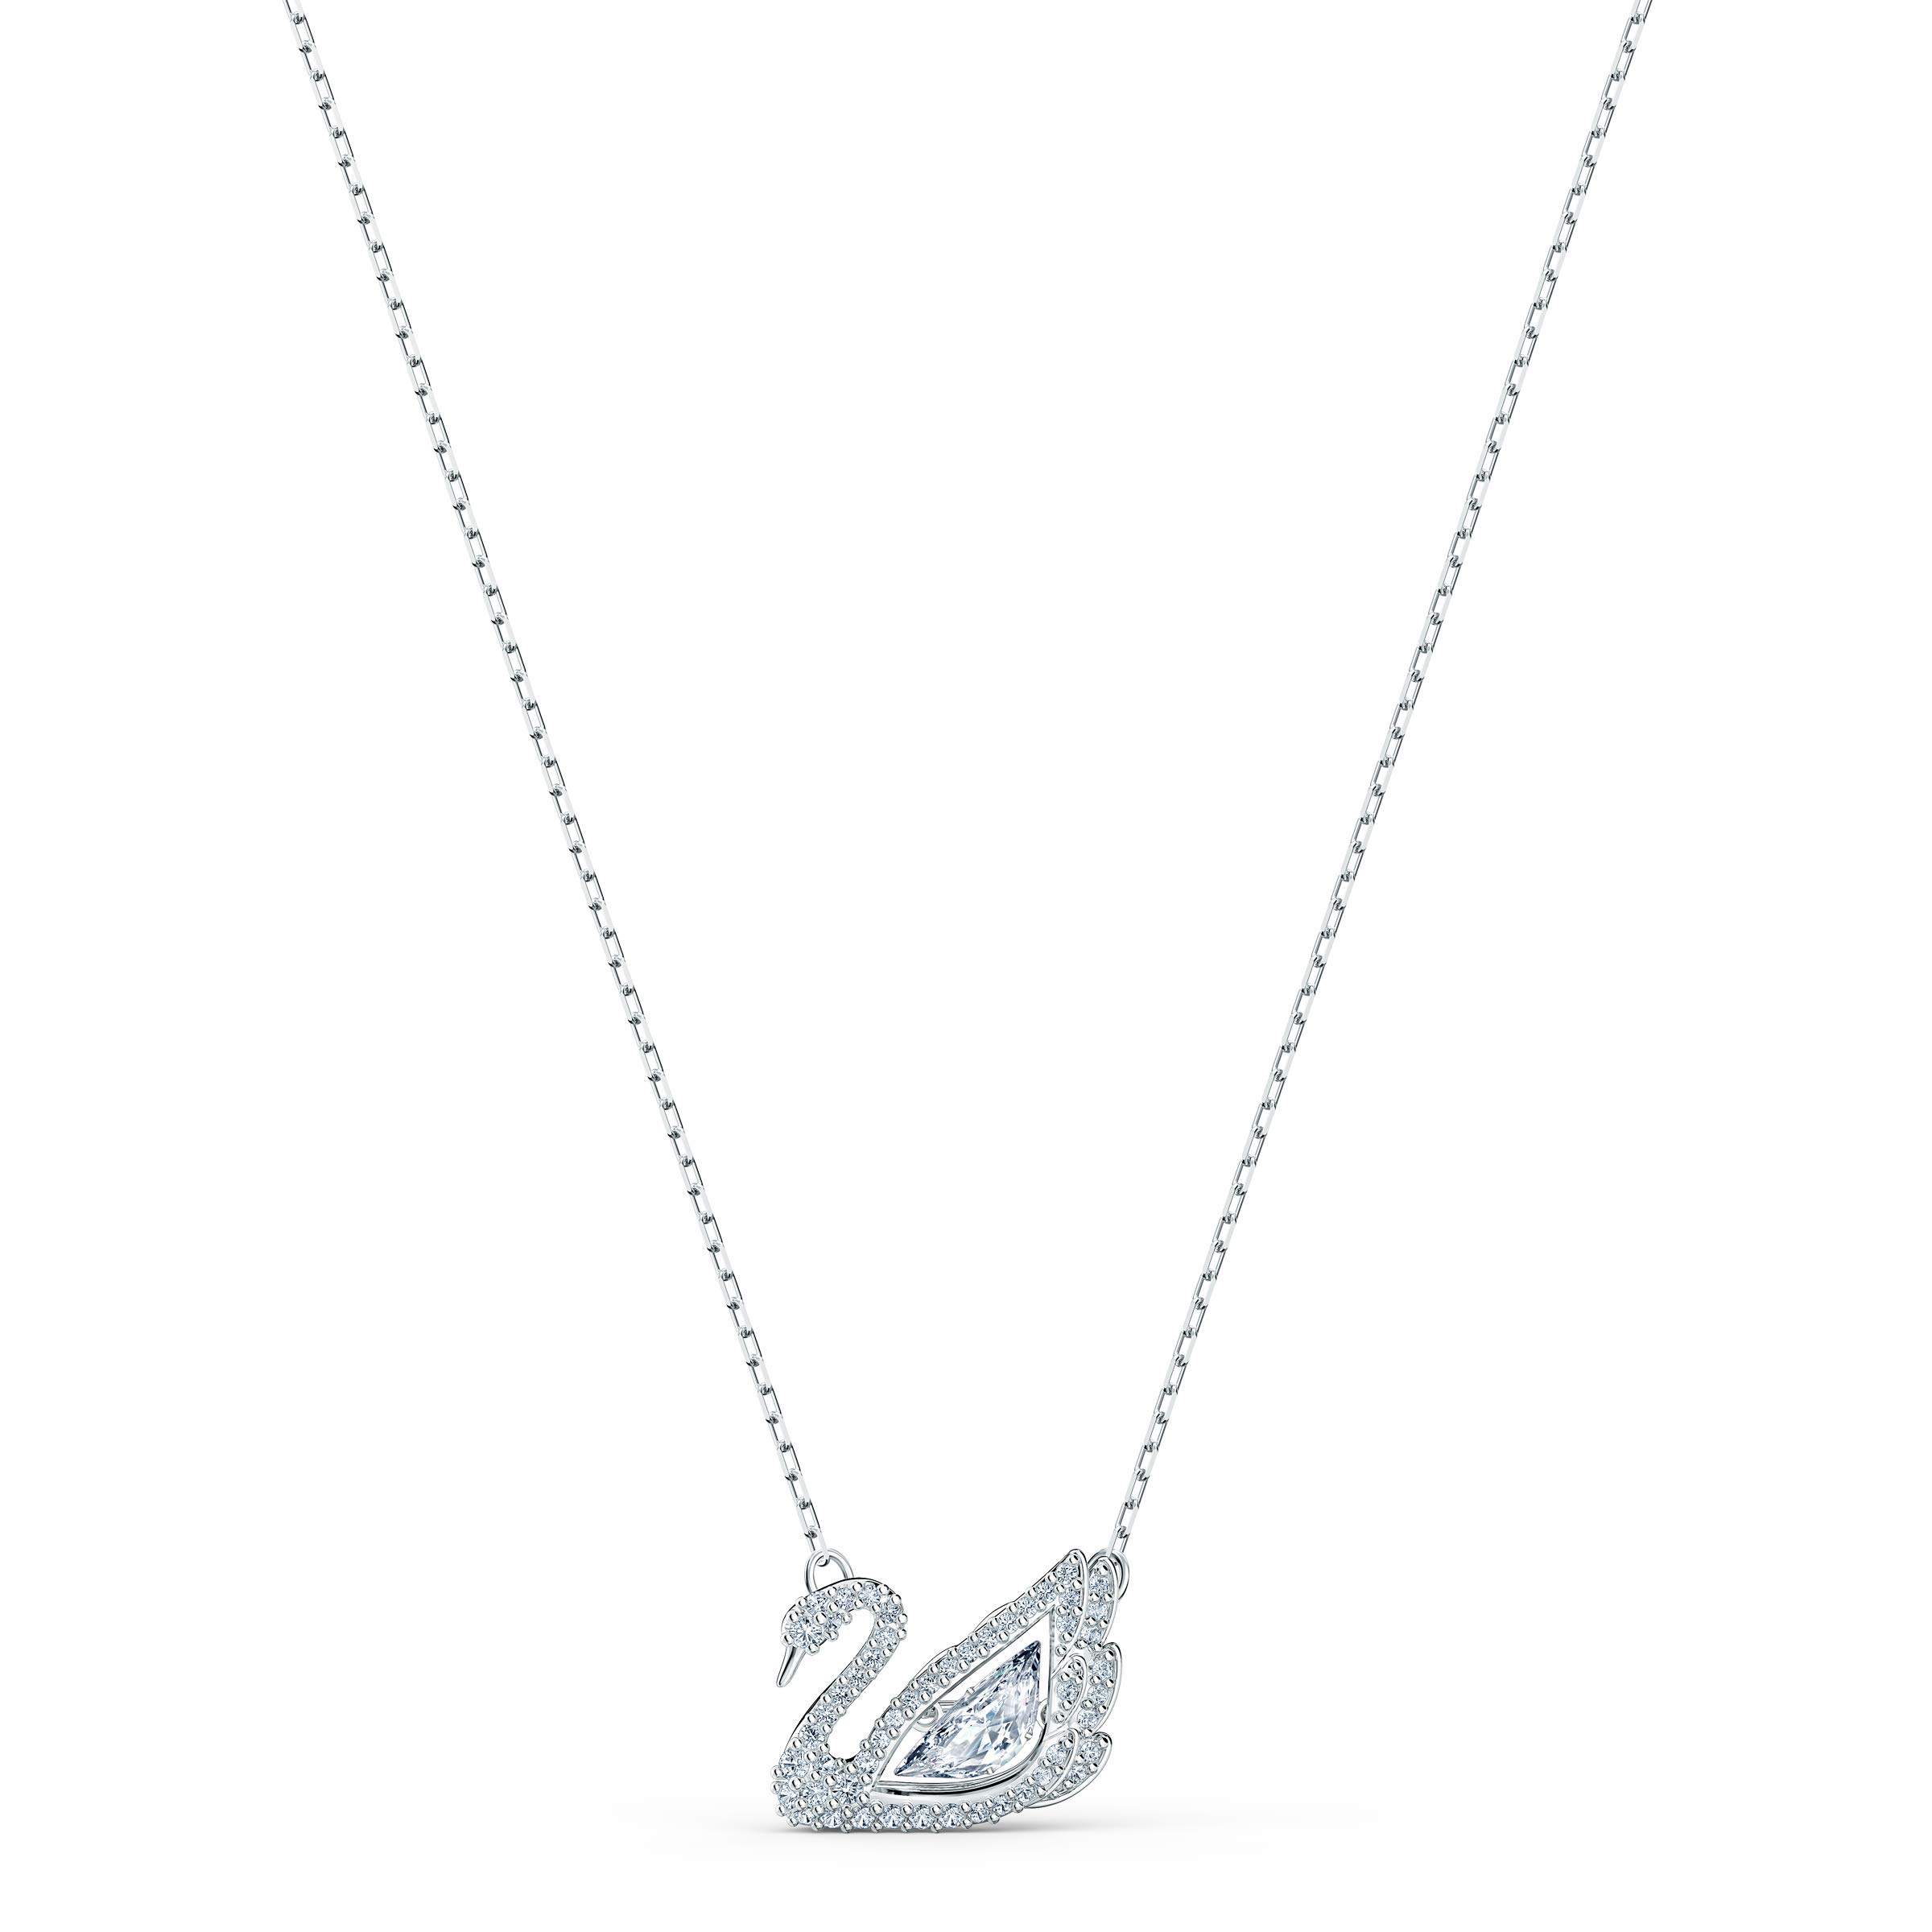 SWAROVSKI Dancing Swan Necklace Jewelry Collection, Rhodium Finish, Blue Crystals, Clear Crystals